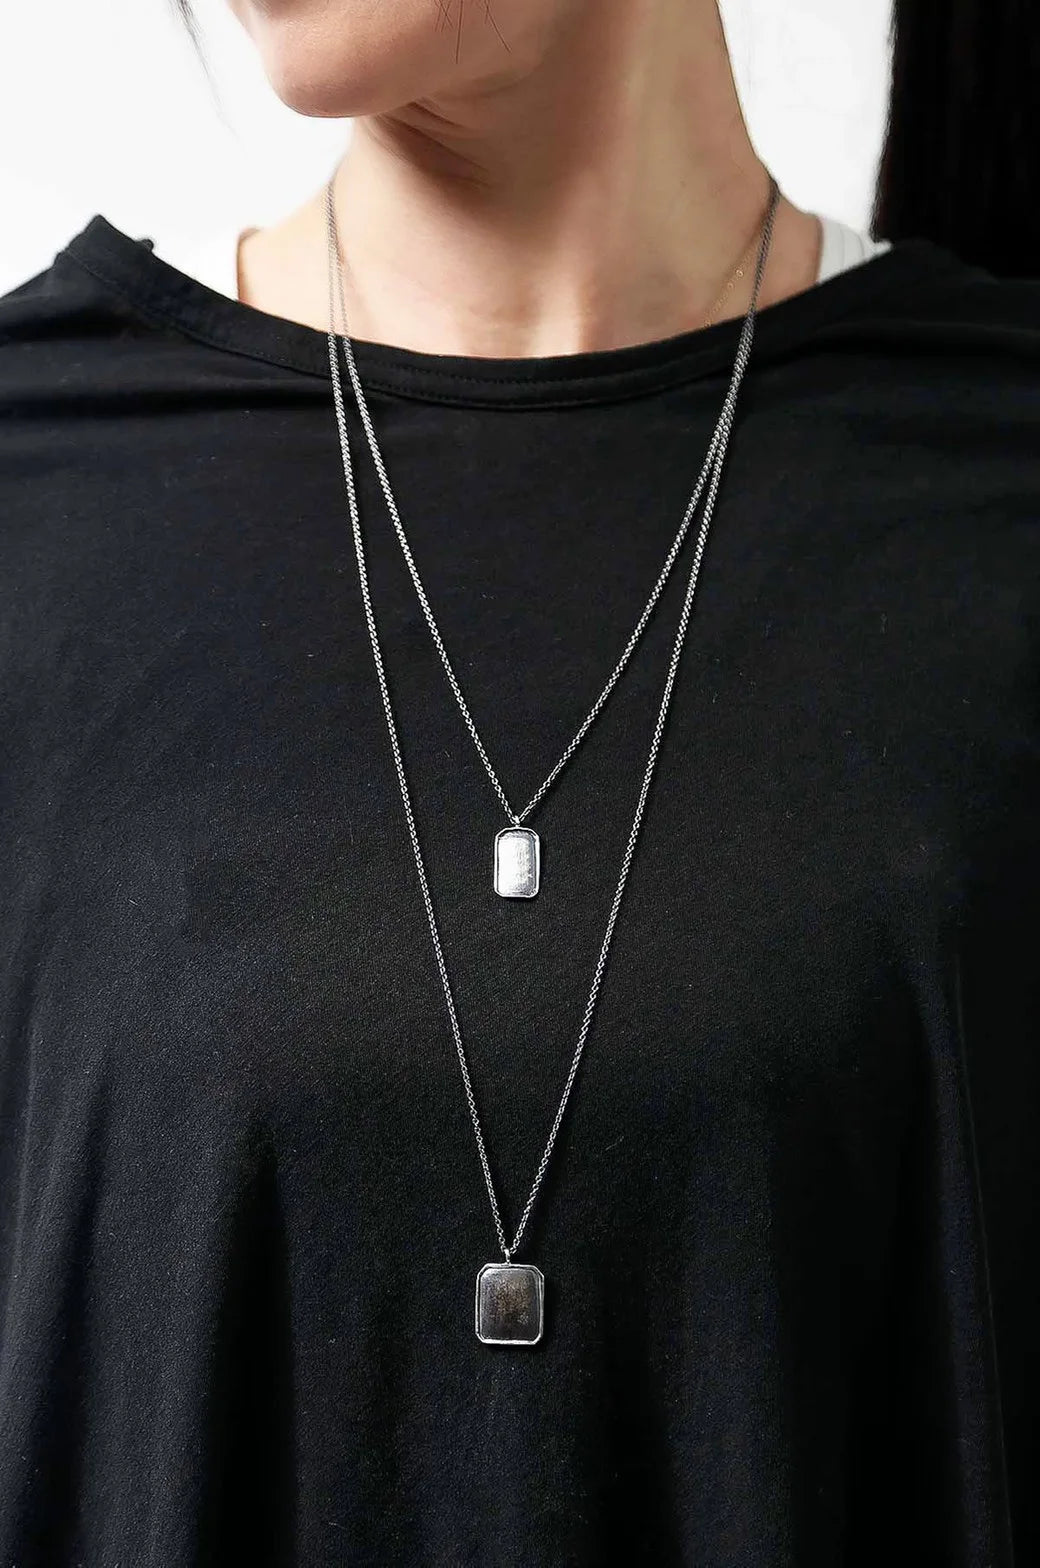 【Rusty Thought】 W SQUARE NECKLACE 120S-TCN_SIL925